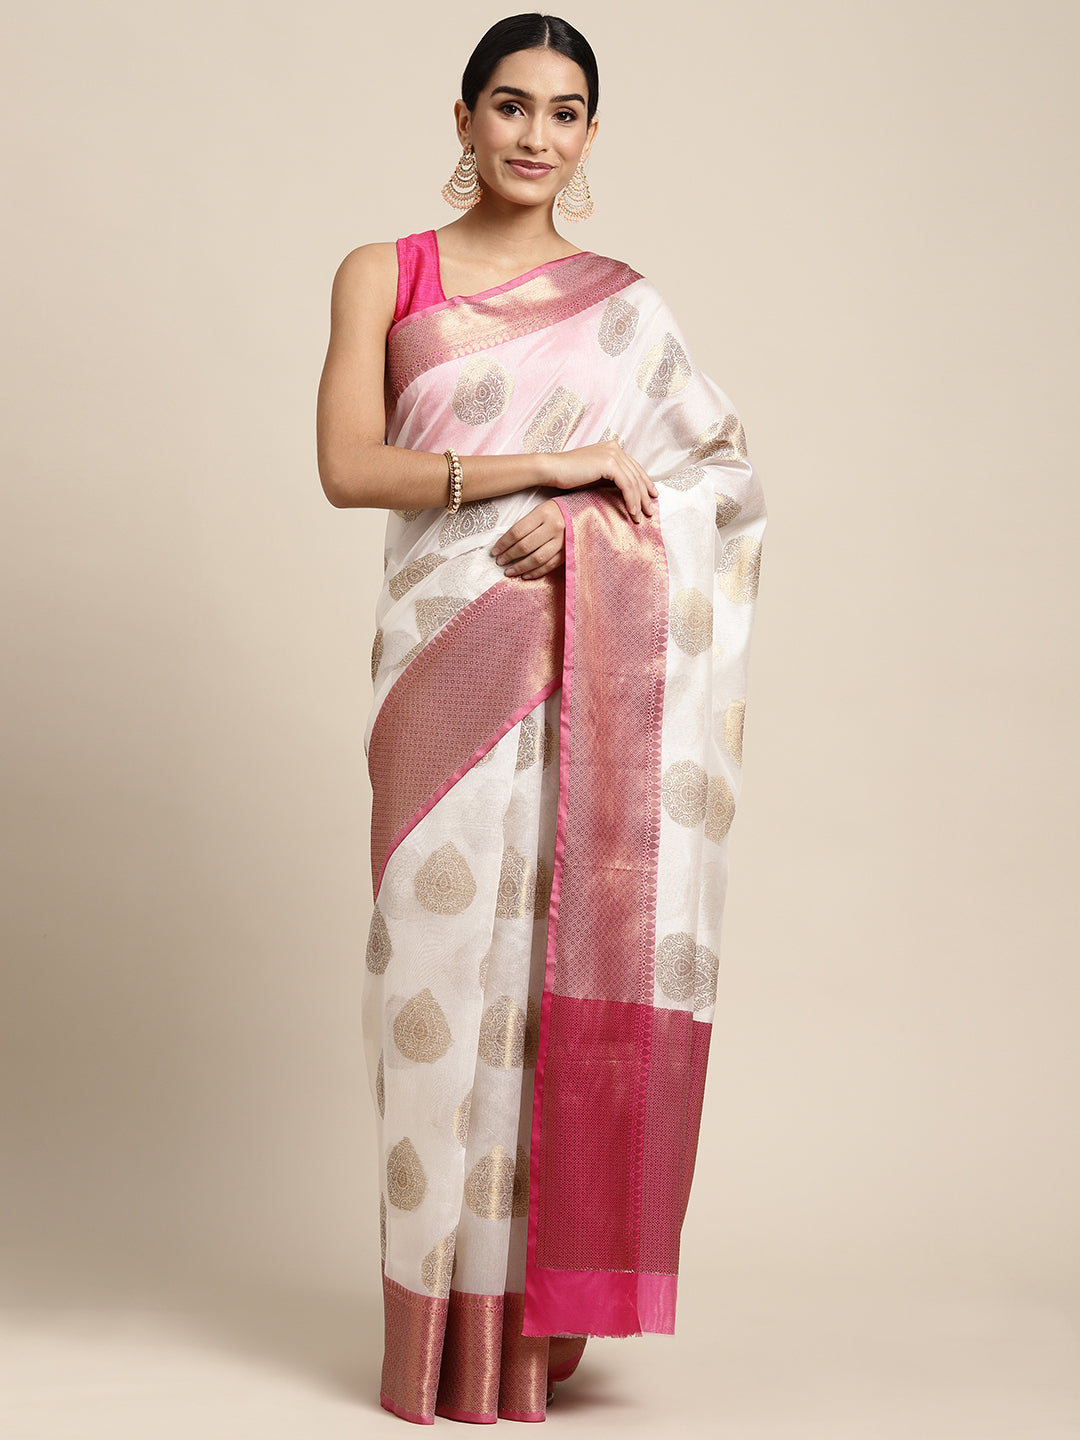 New Classic Kanchi Saree House Hyderabad - New Classic Kanchi Saree House  coupons, New Classic Kanchi Saree House Discount offers, sales